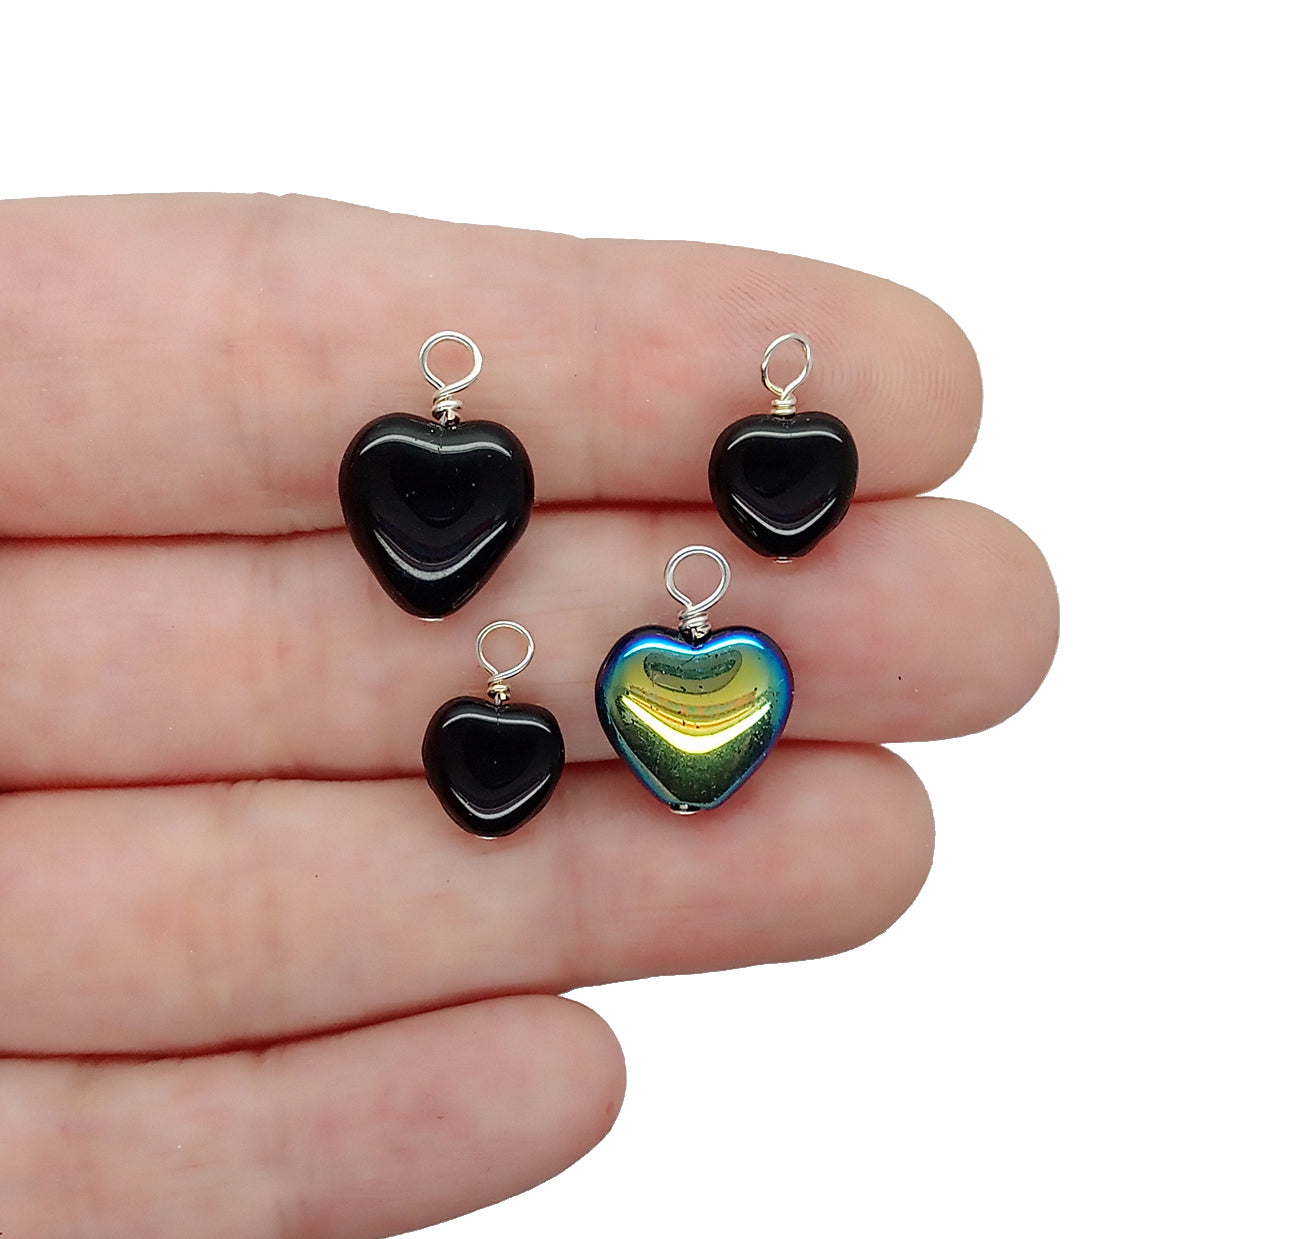 Black Heart Charms made from Glass Beads, 10 pieces